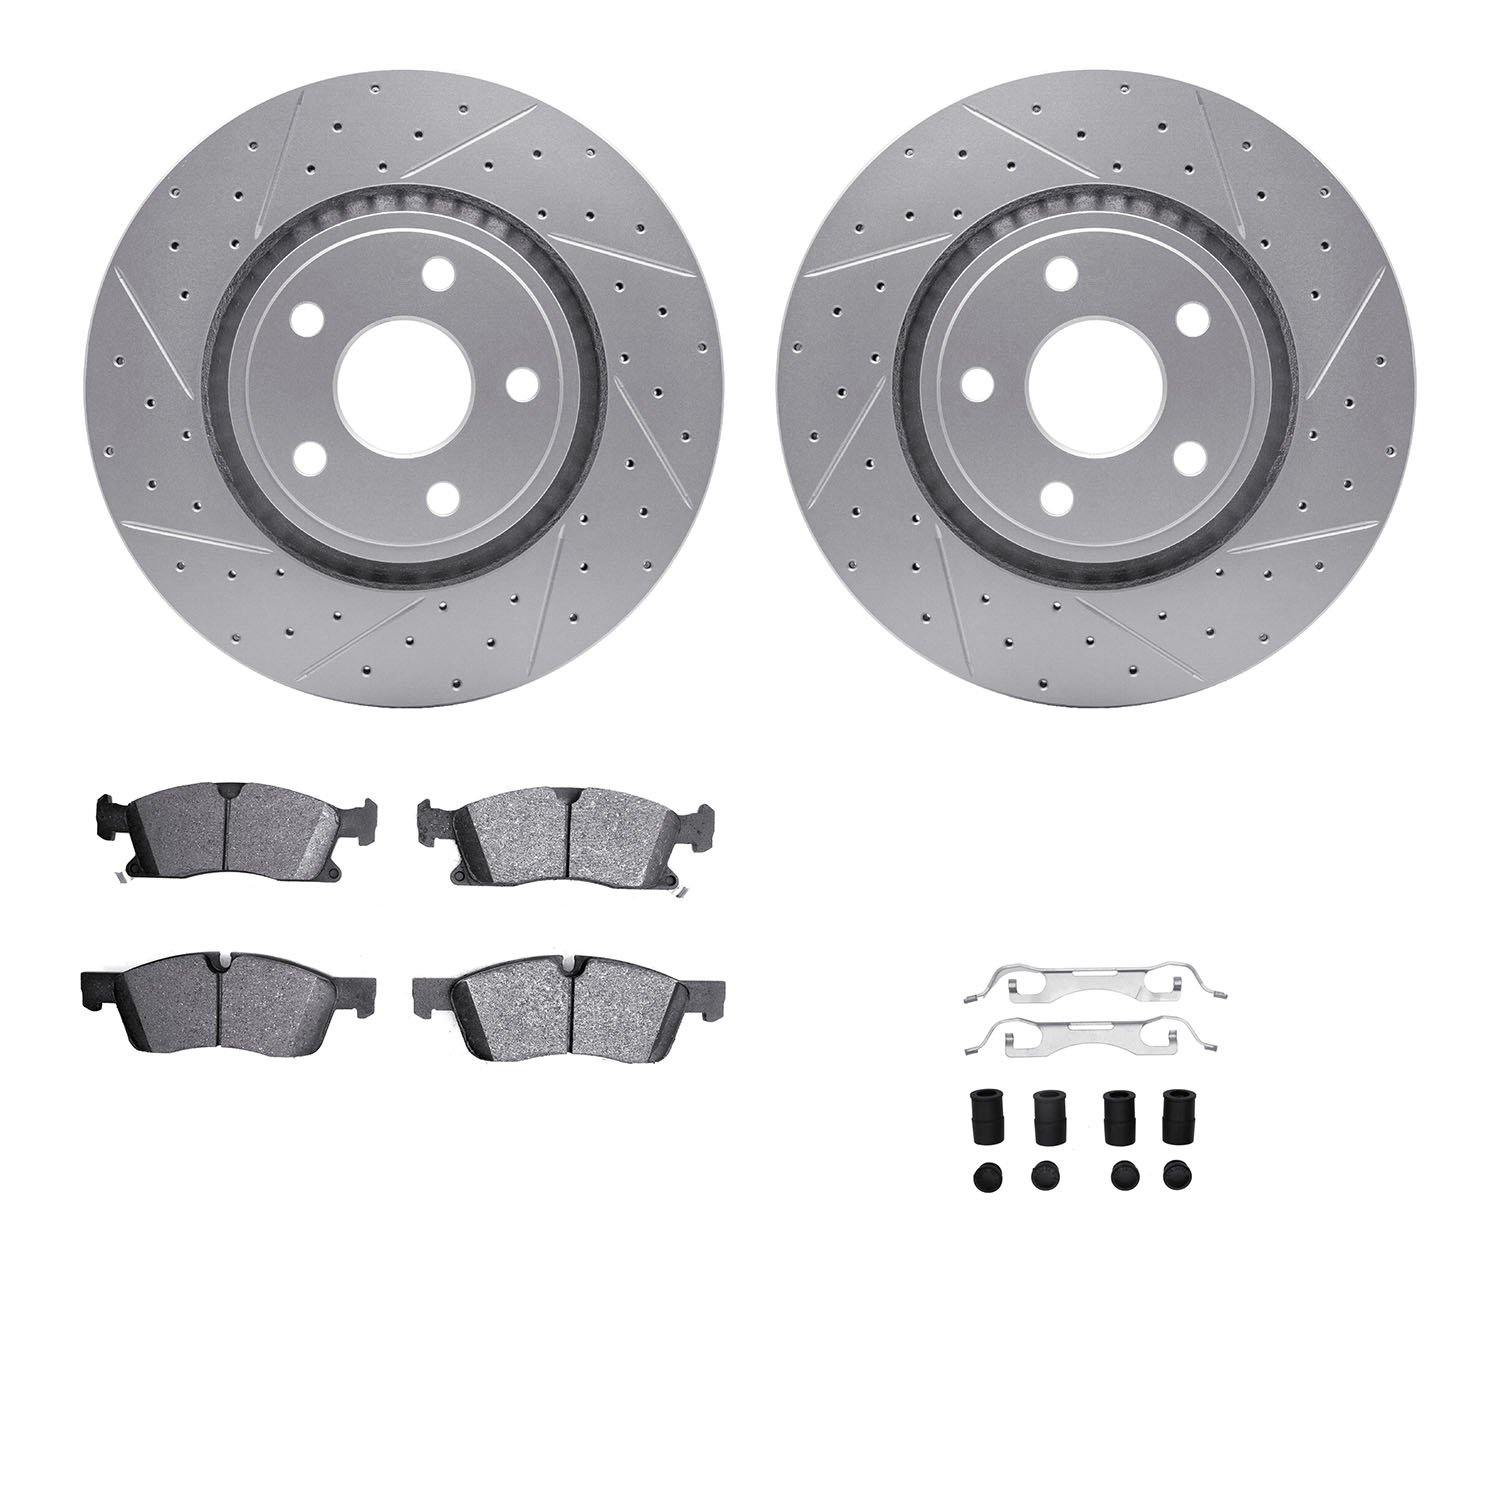 2212-42004 Geoperformance Drilled/Slotted Rotors w/Heavy-Duty Pads Kit & Hardware, Fits Select Mopar, Position: Front